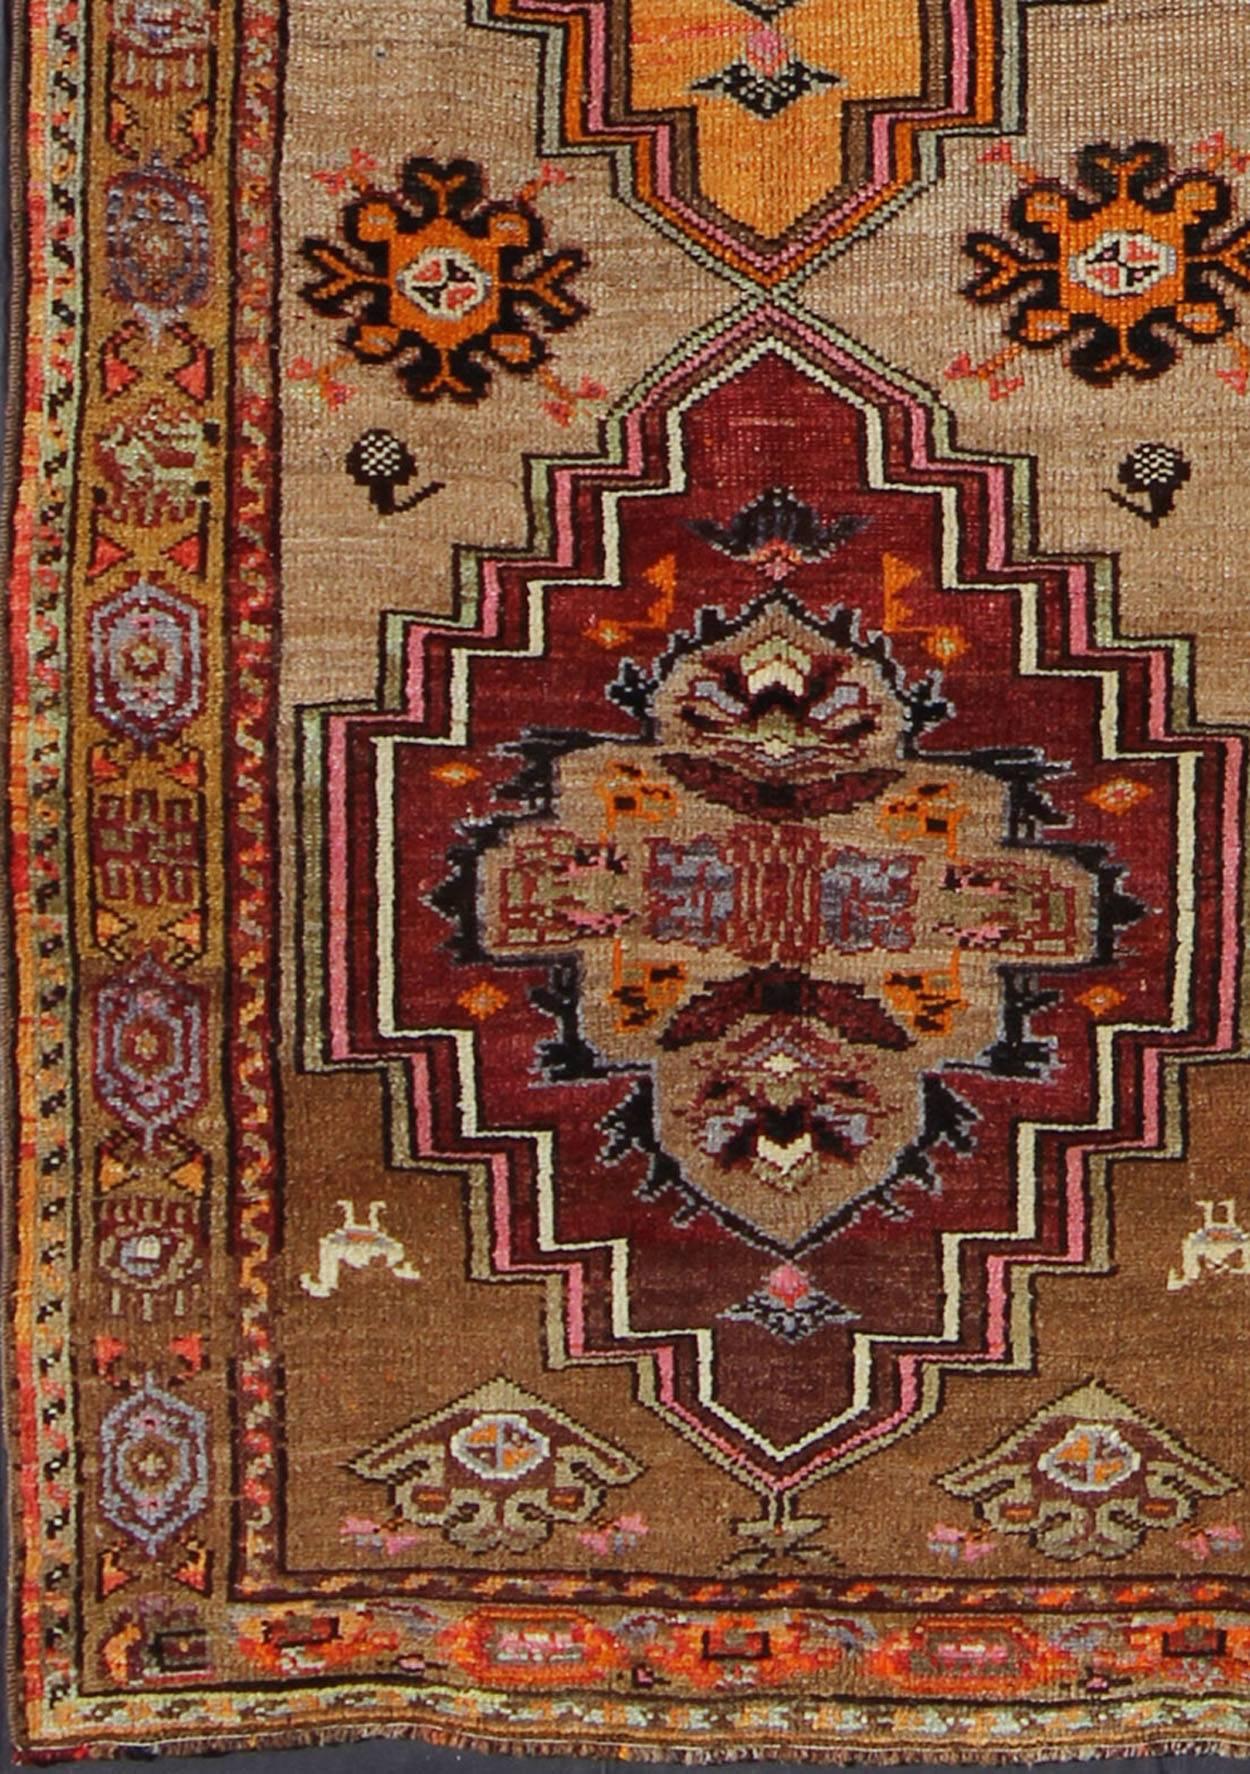 Vintage Turkish Oushak runner with three medallions in maroon, gold, and taupe, rug mtu-4624, country of origin / type: Turkey / Oushak, circa mid-20th century.

This vintage Turkish Oushak gallery rug (circa mid-20th century) features a unique